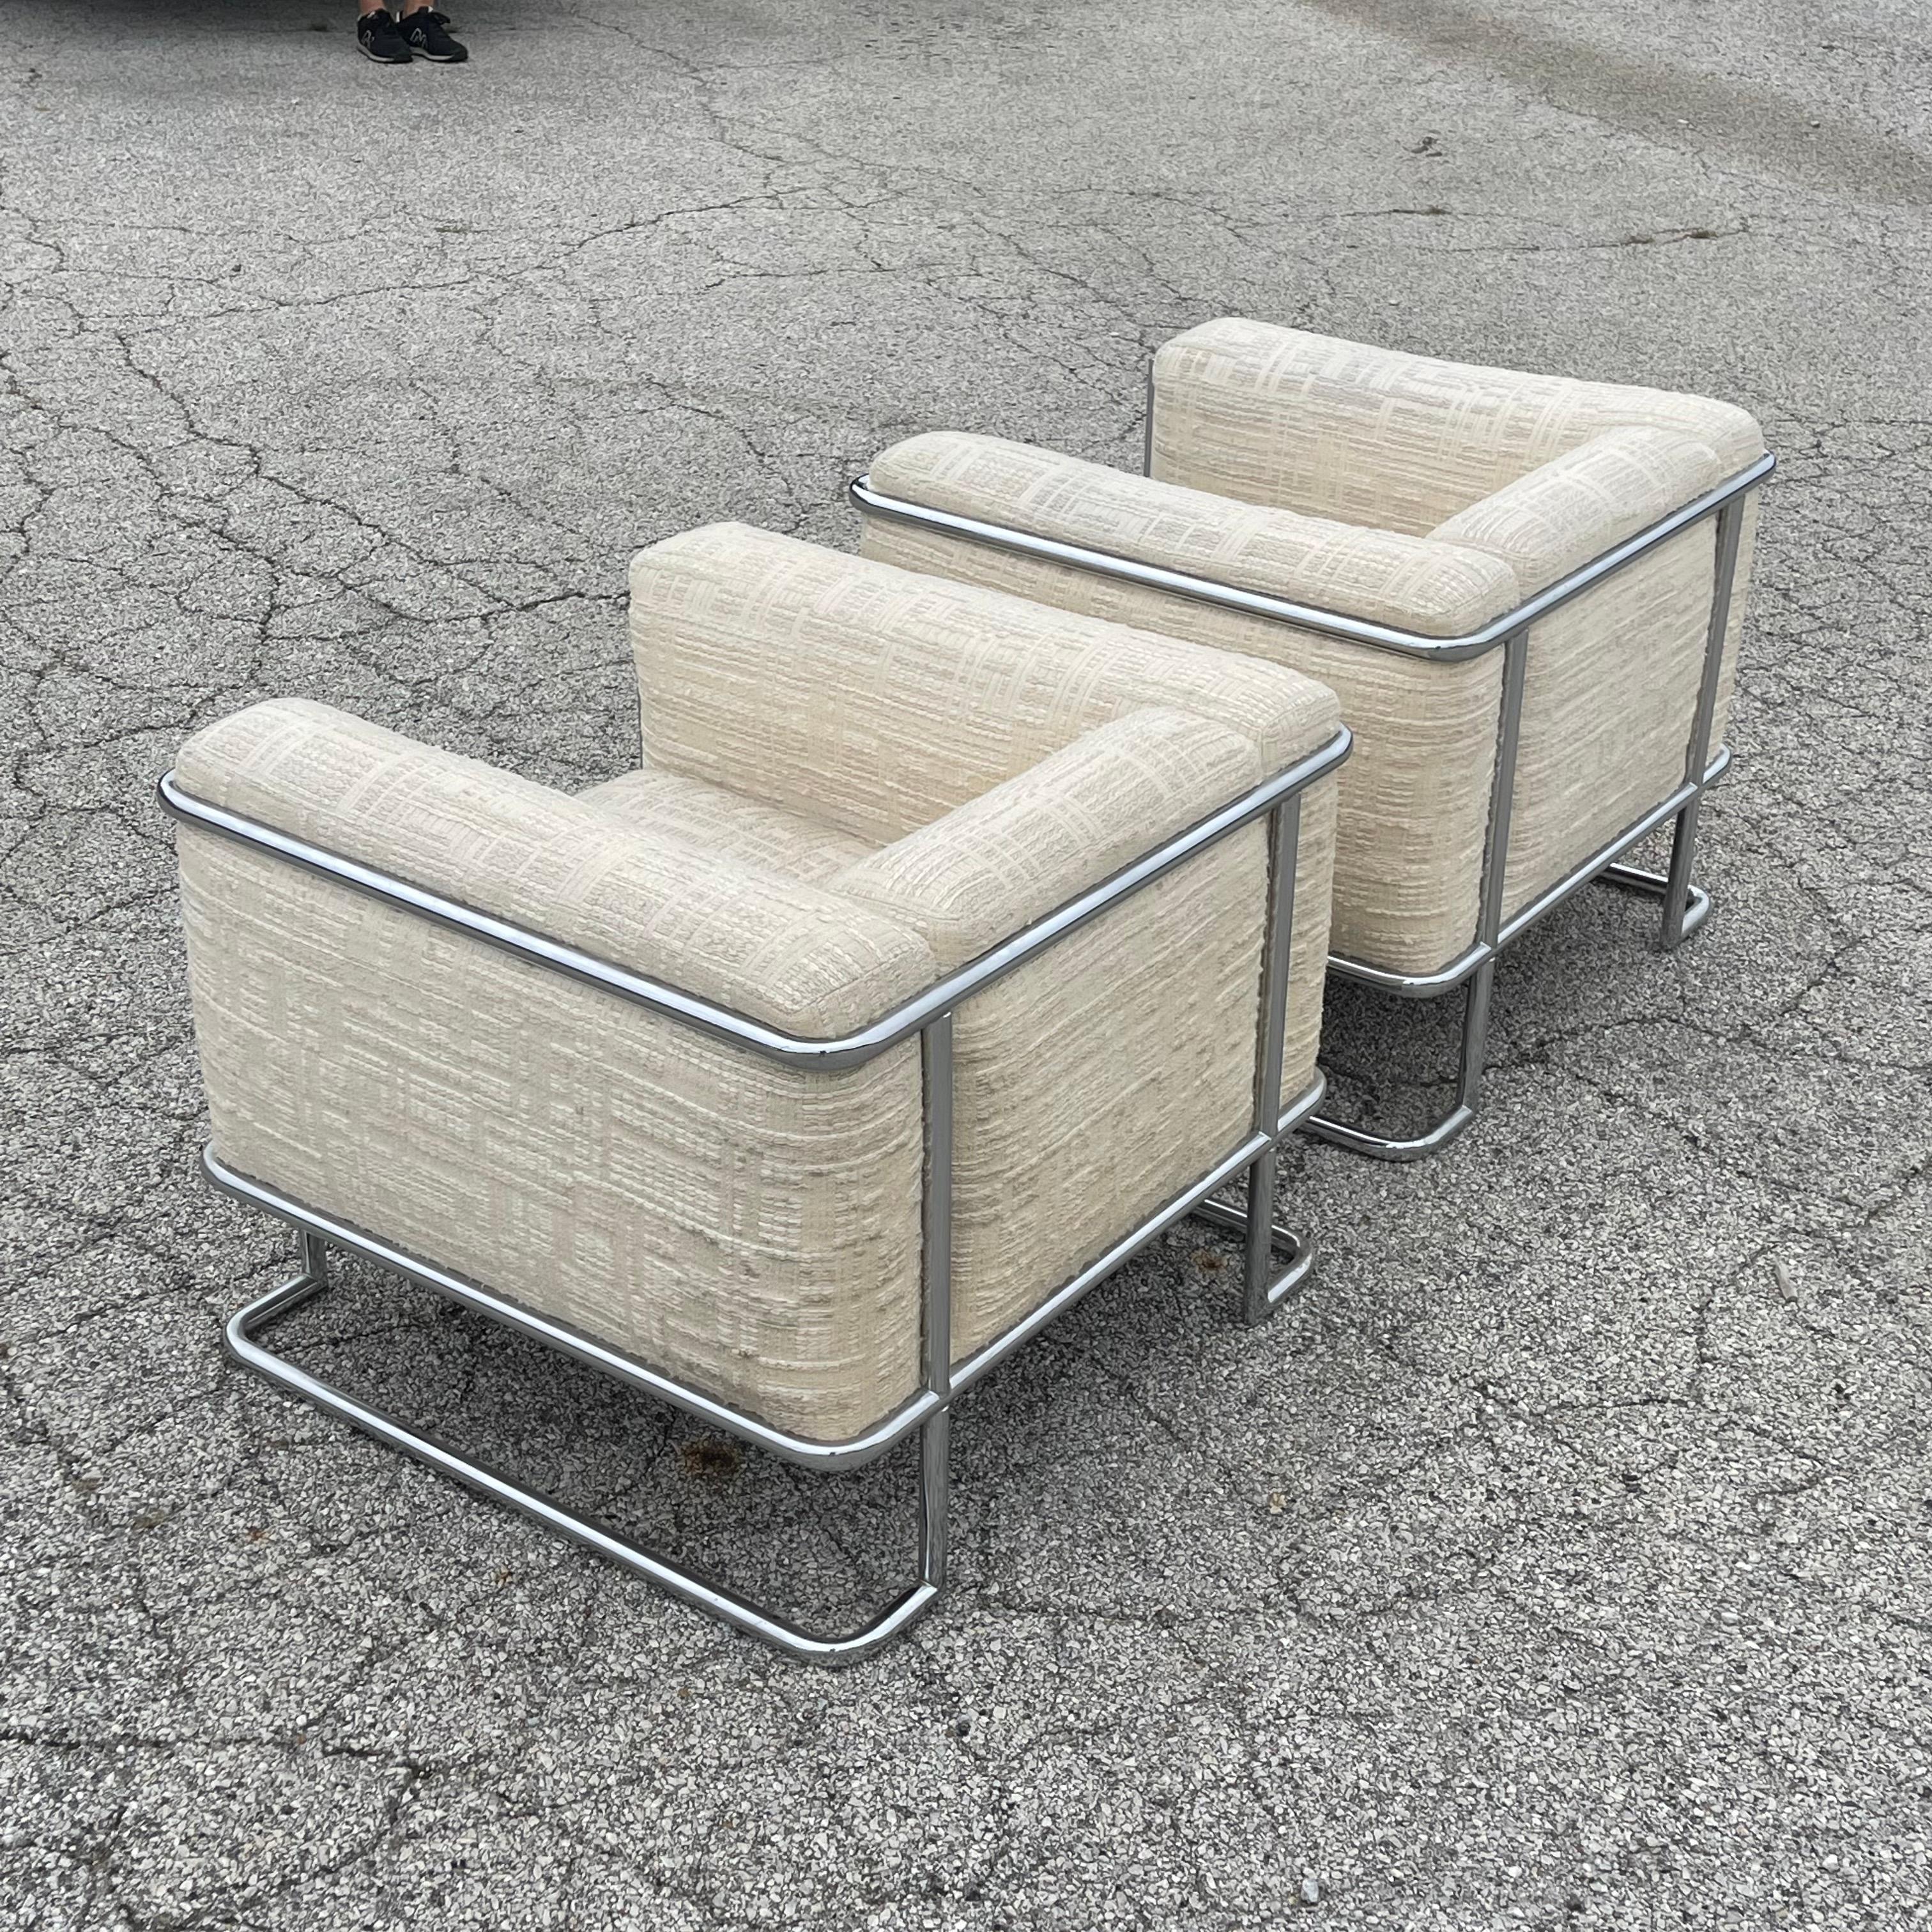 John Mascheroni Pair of Lounge Chairs by Swaim Originals In Good Condition For Sale In Highland, IN